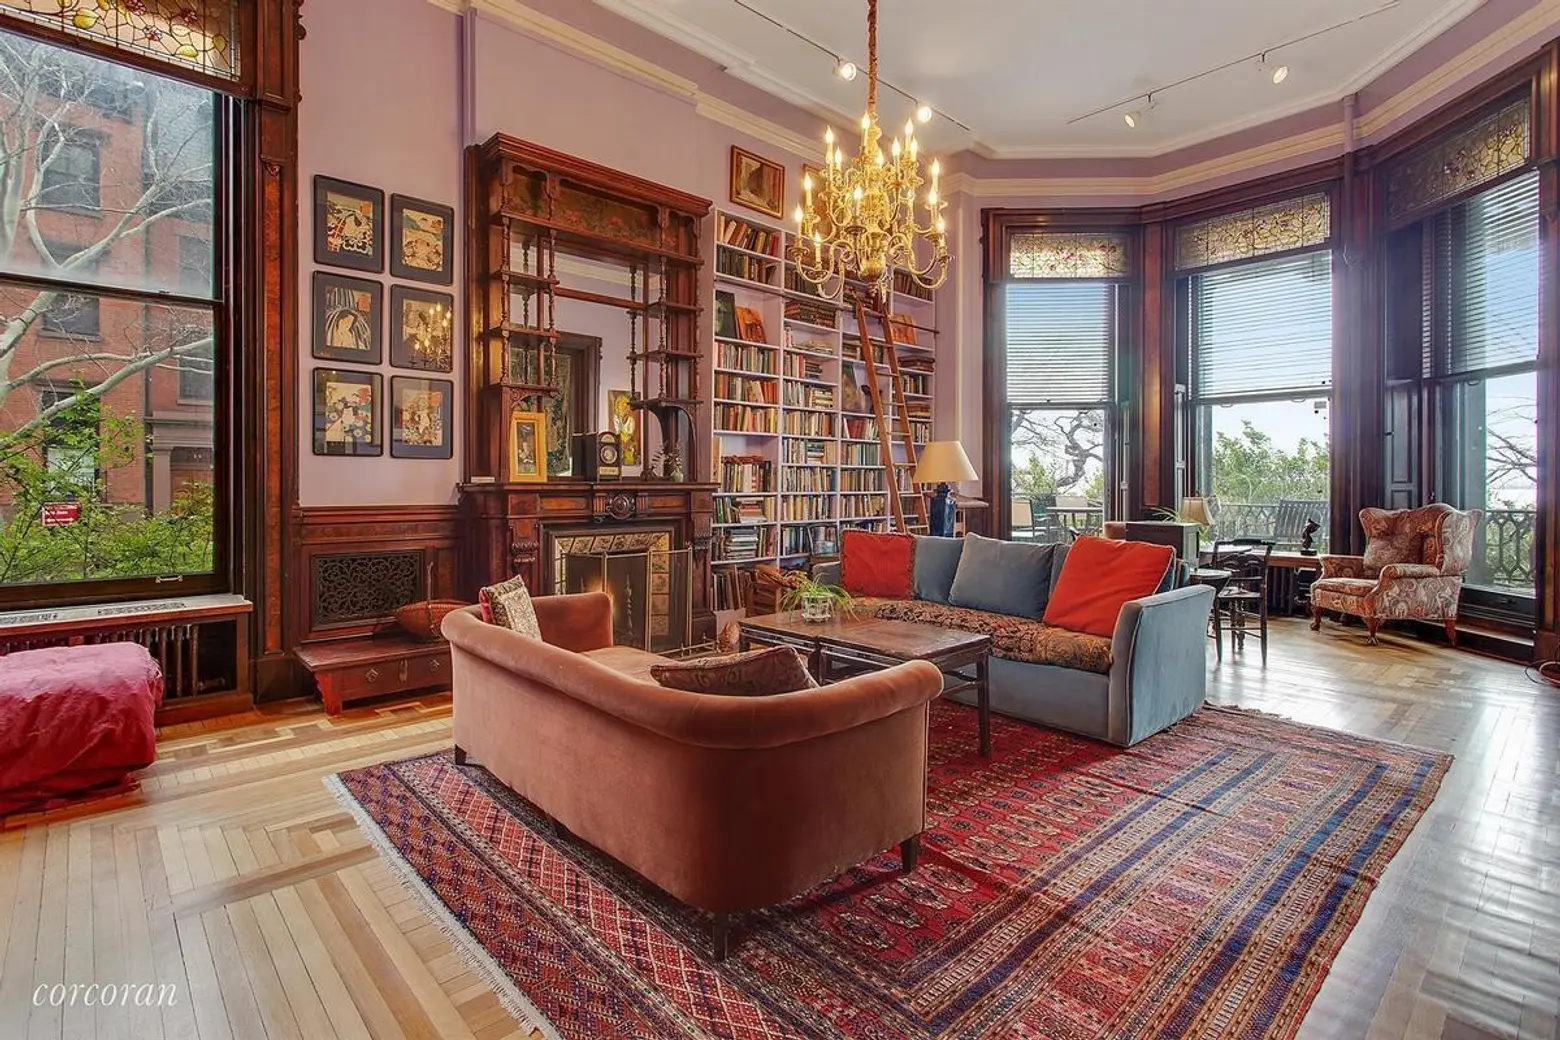 Brooklyn Heights co-op in a former mansion offers ‘castle-like’ grandeur for $1M